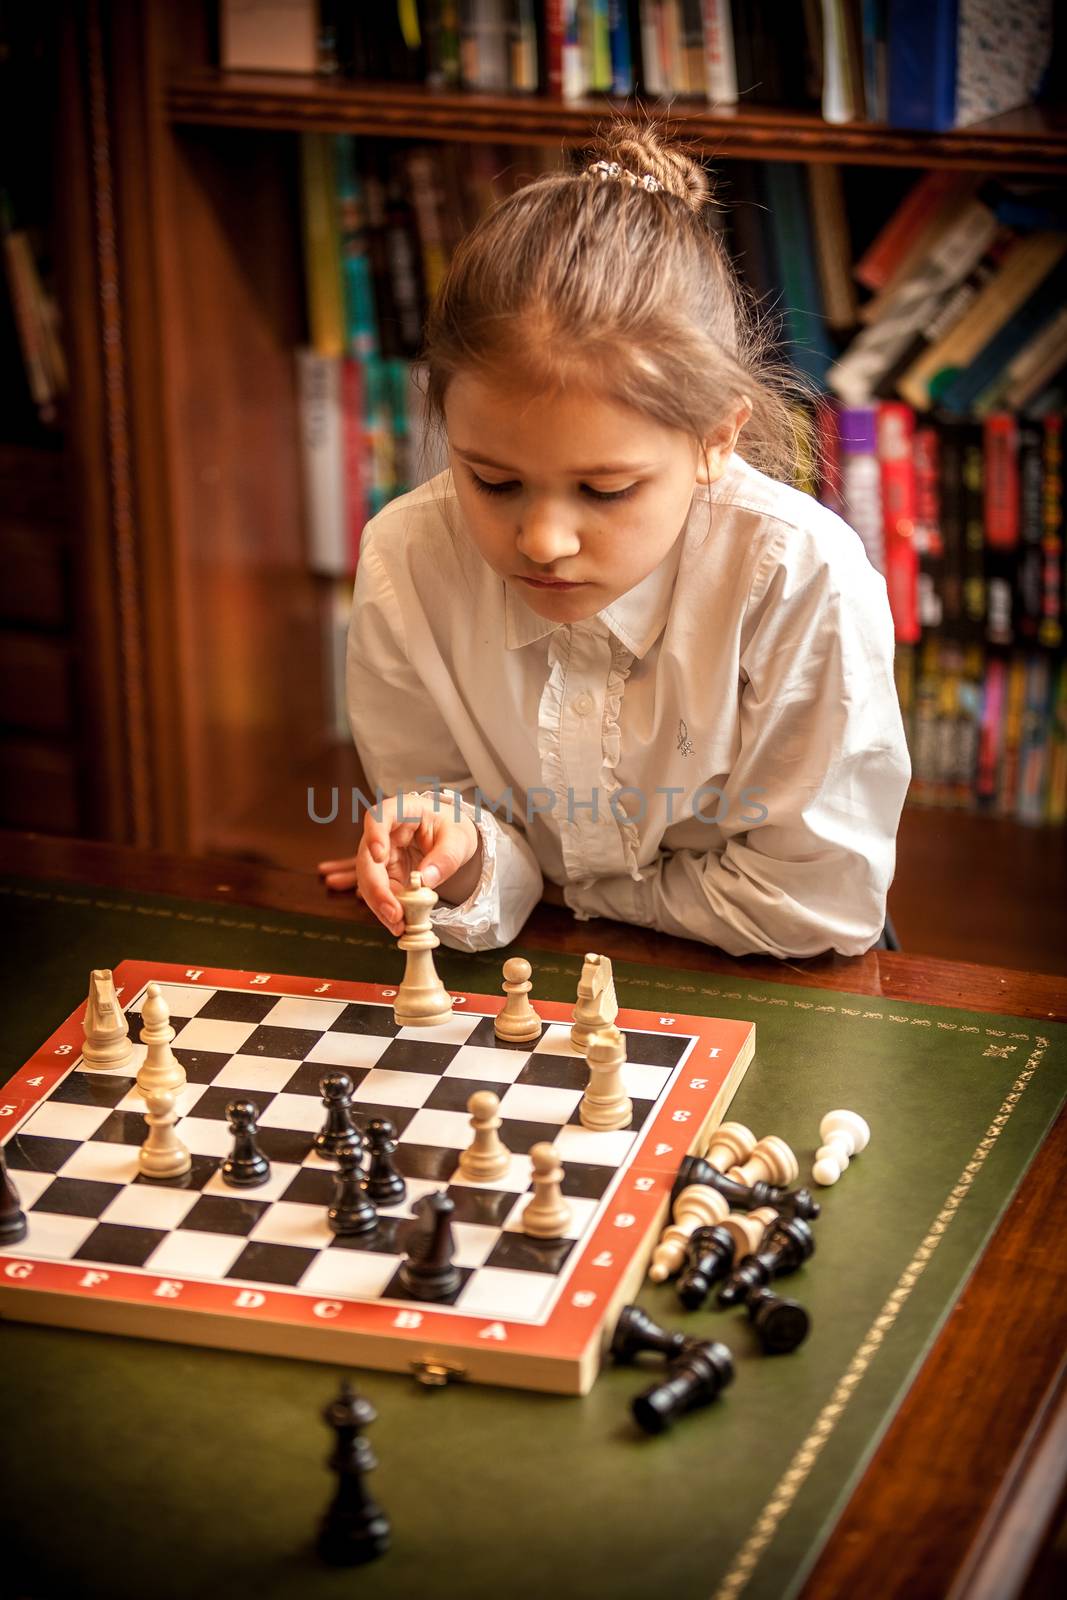 Girl making move on chess board by Kryzhov